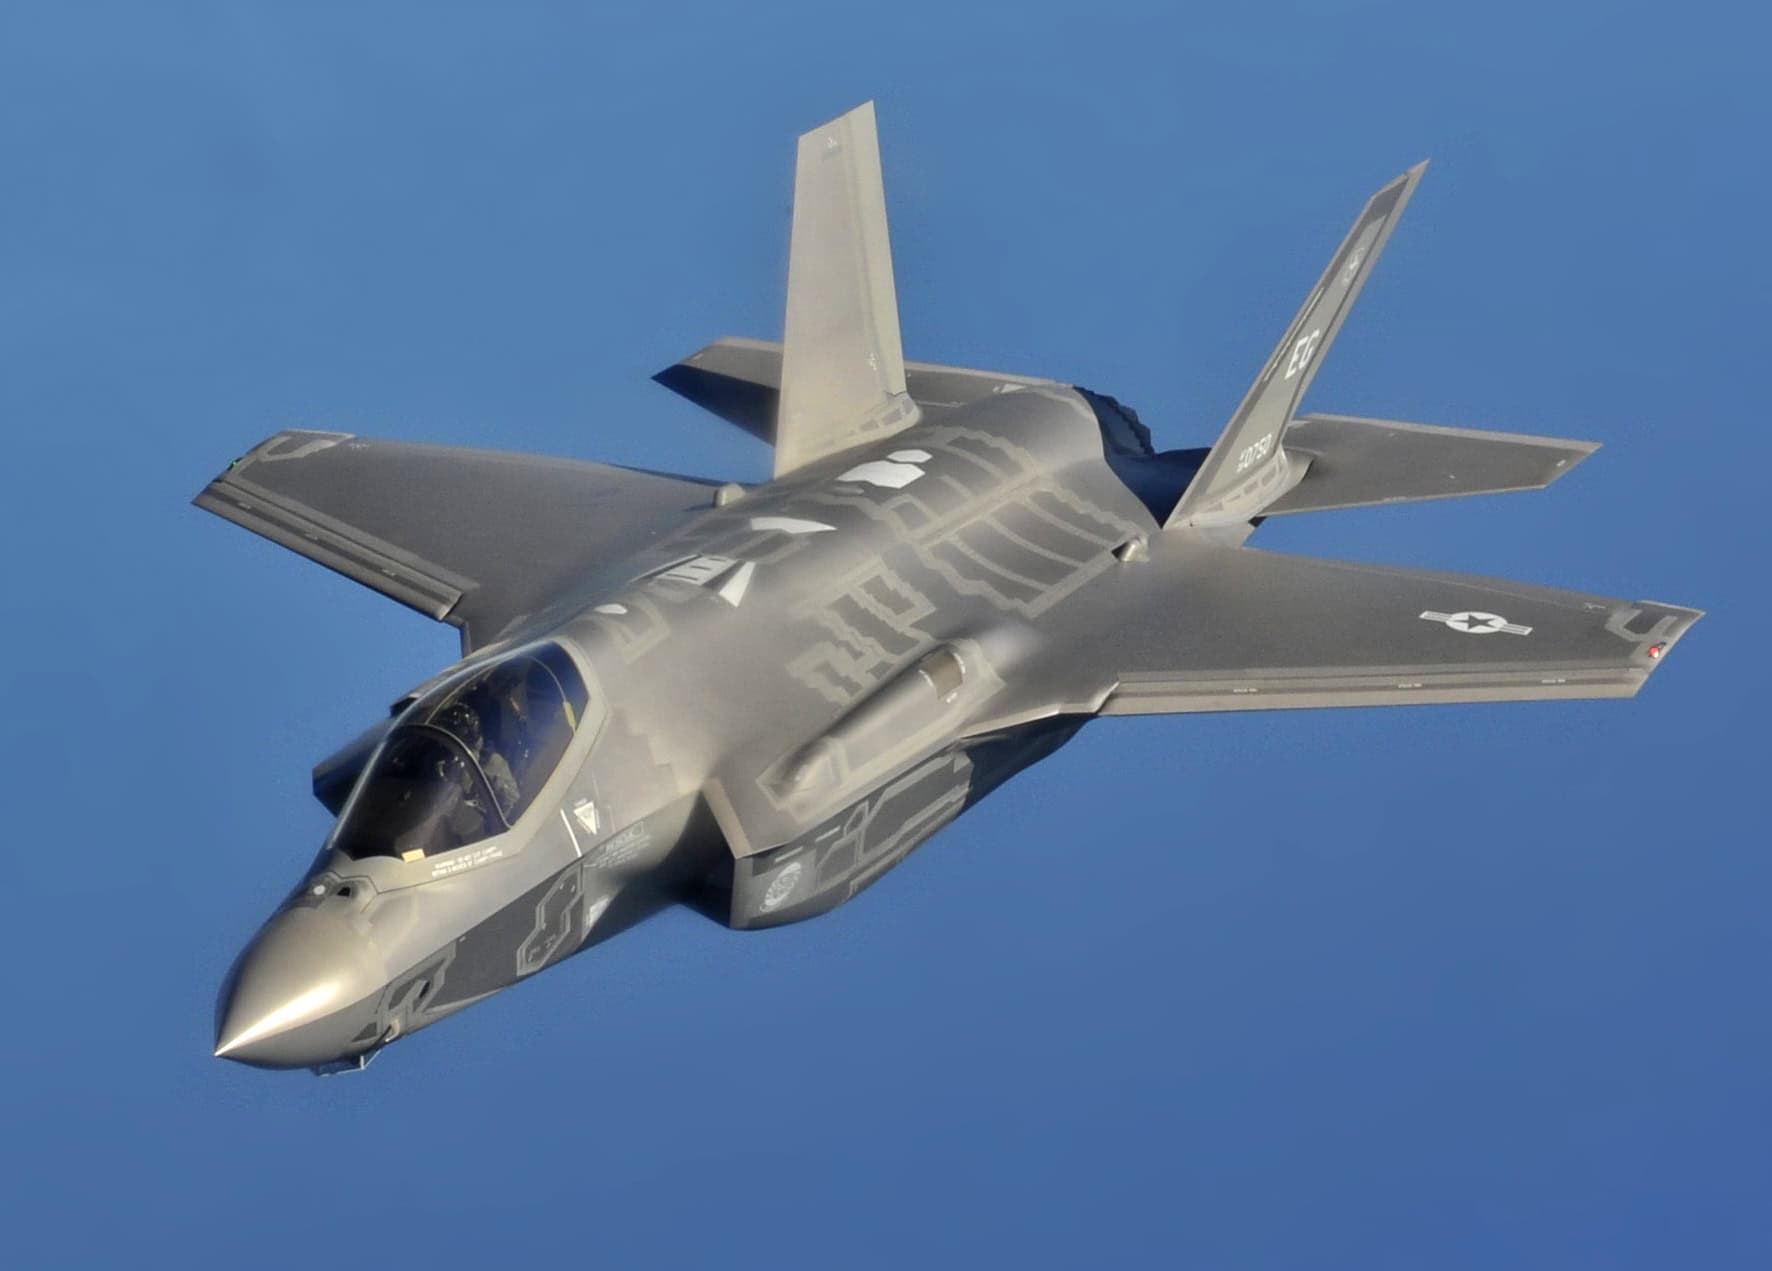 File:F-35A flight (cropped).jpg by U.S. Air Force photo by Master Sgt. Donald R. Allen